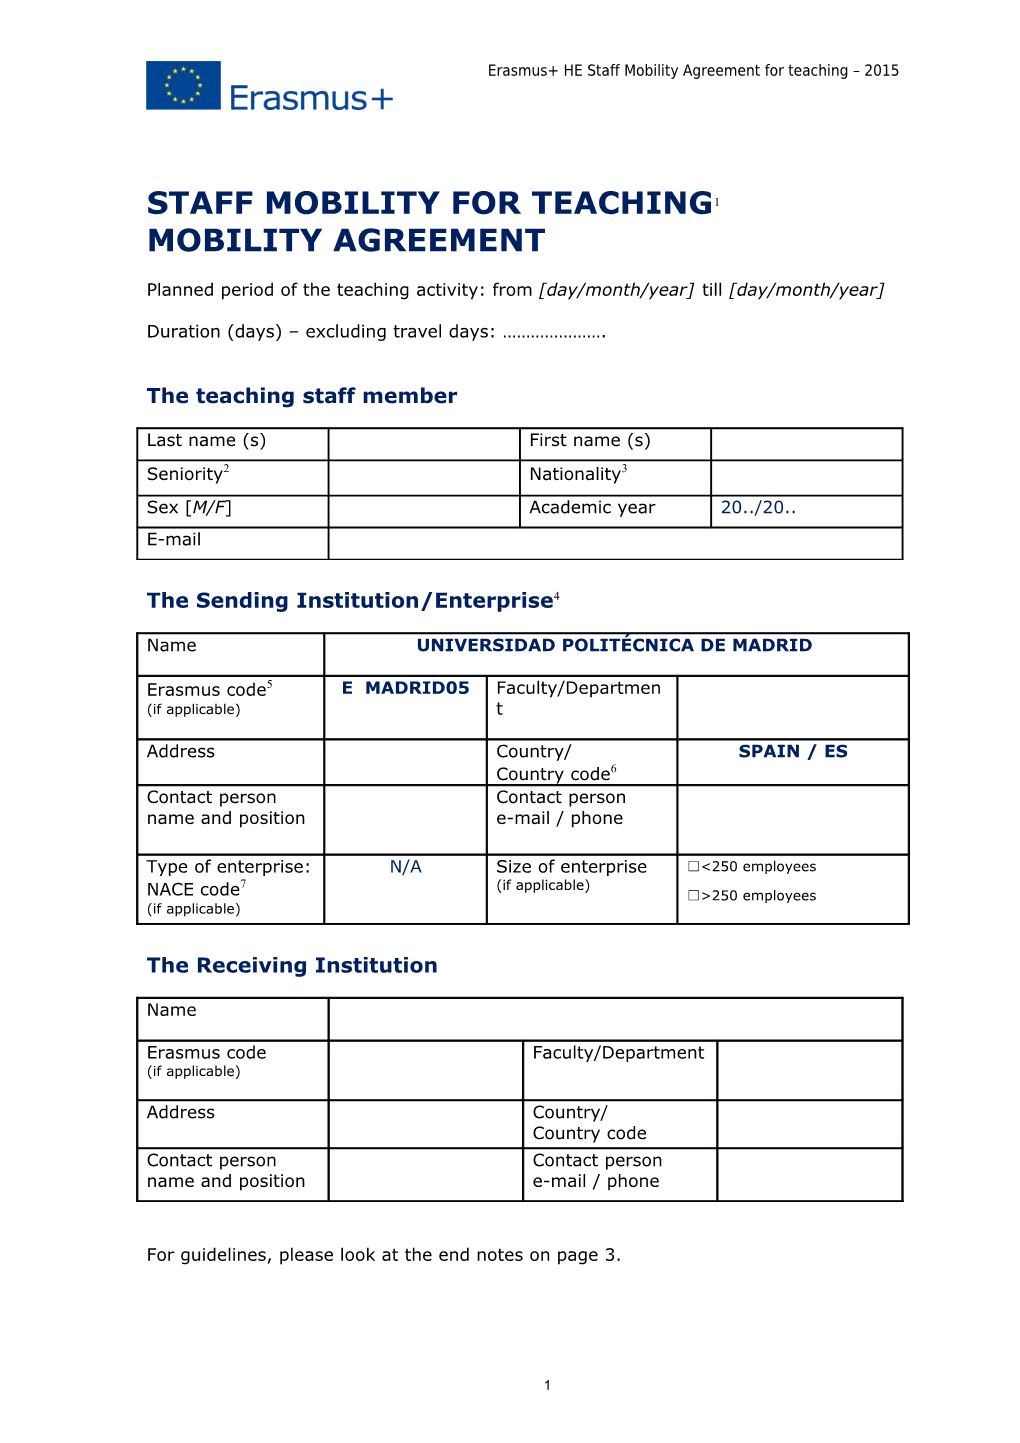 Erasmus+ HE Staff Mobility Agreement for Teaching 2015